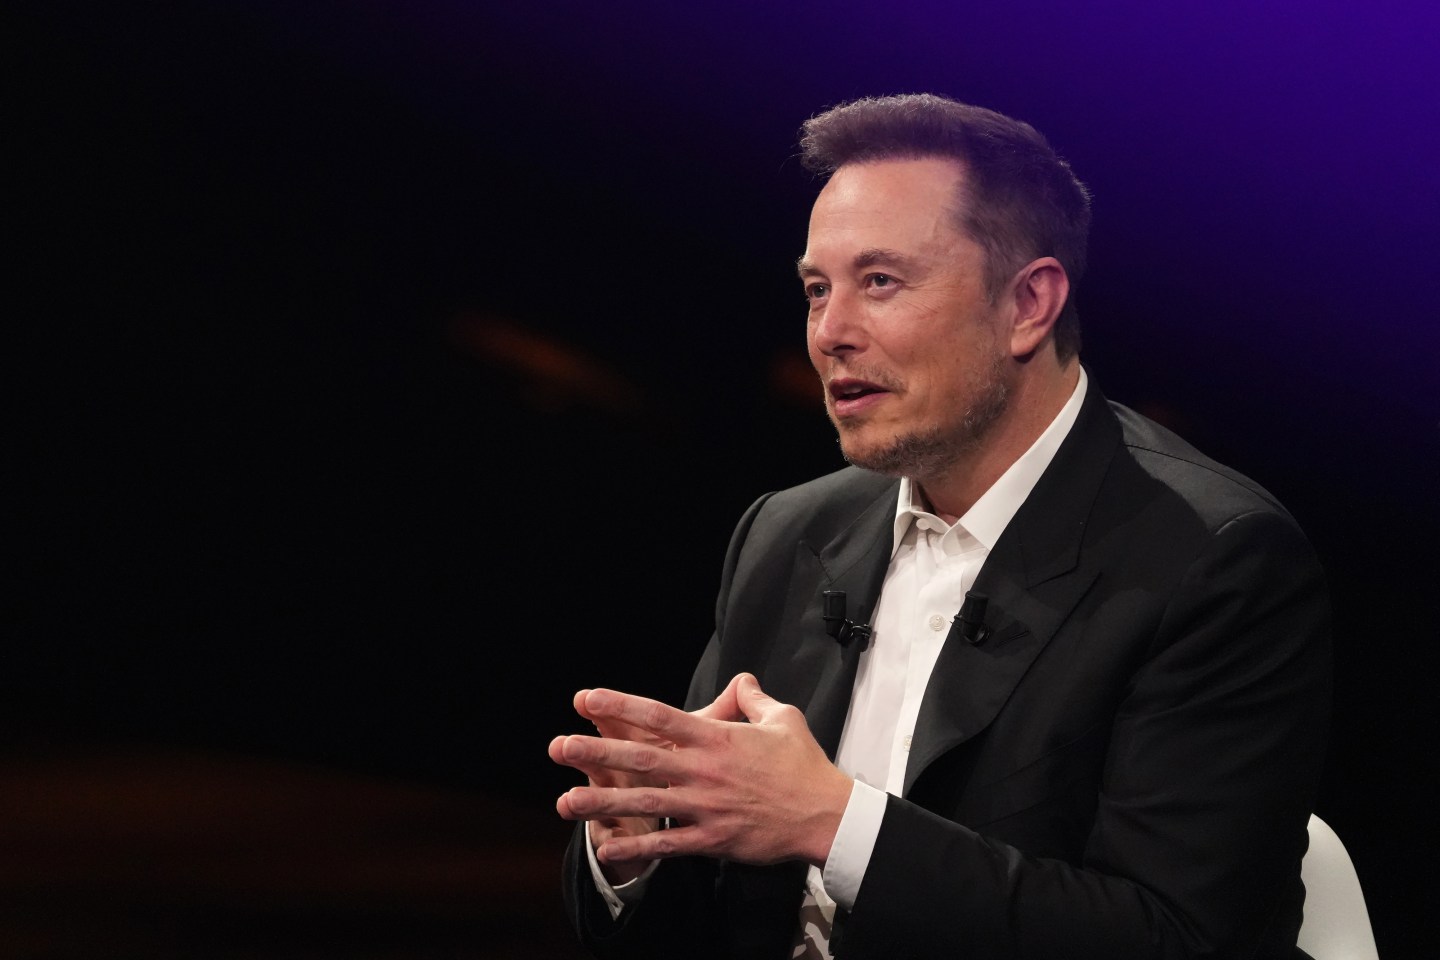 Elon Musk speaking at a conference in Paris.